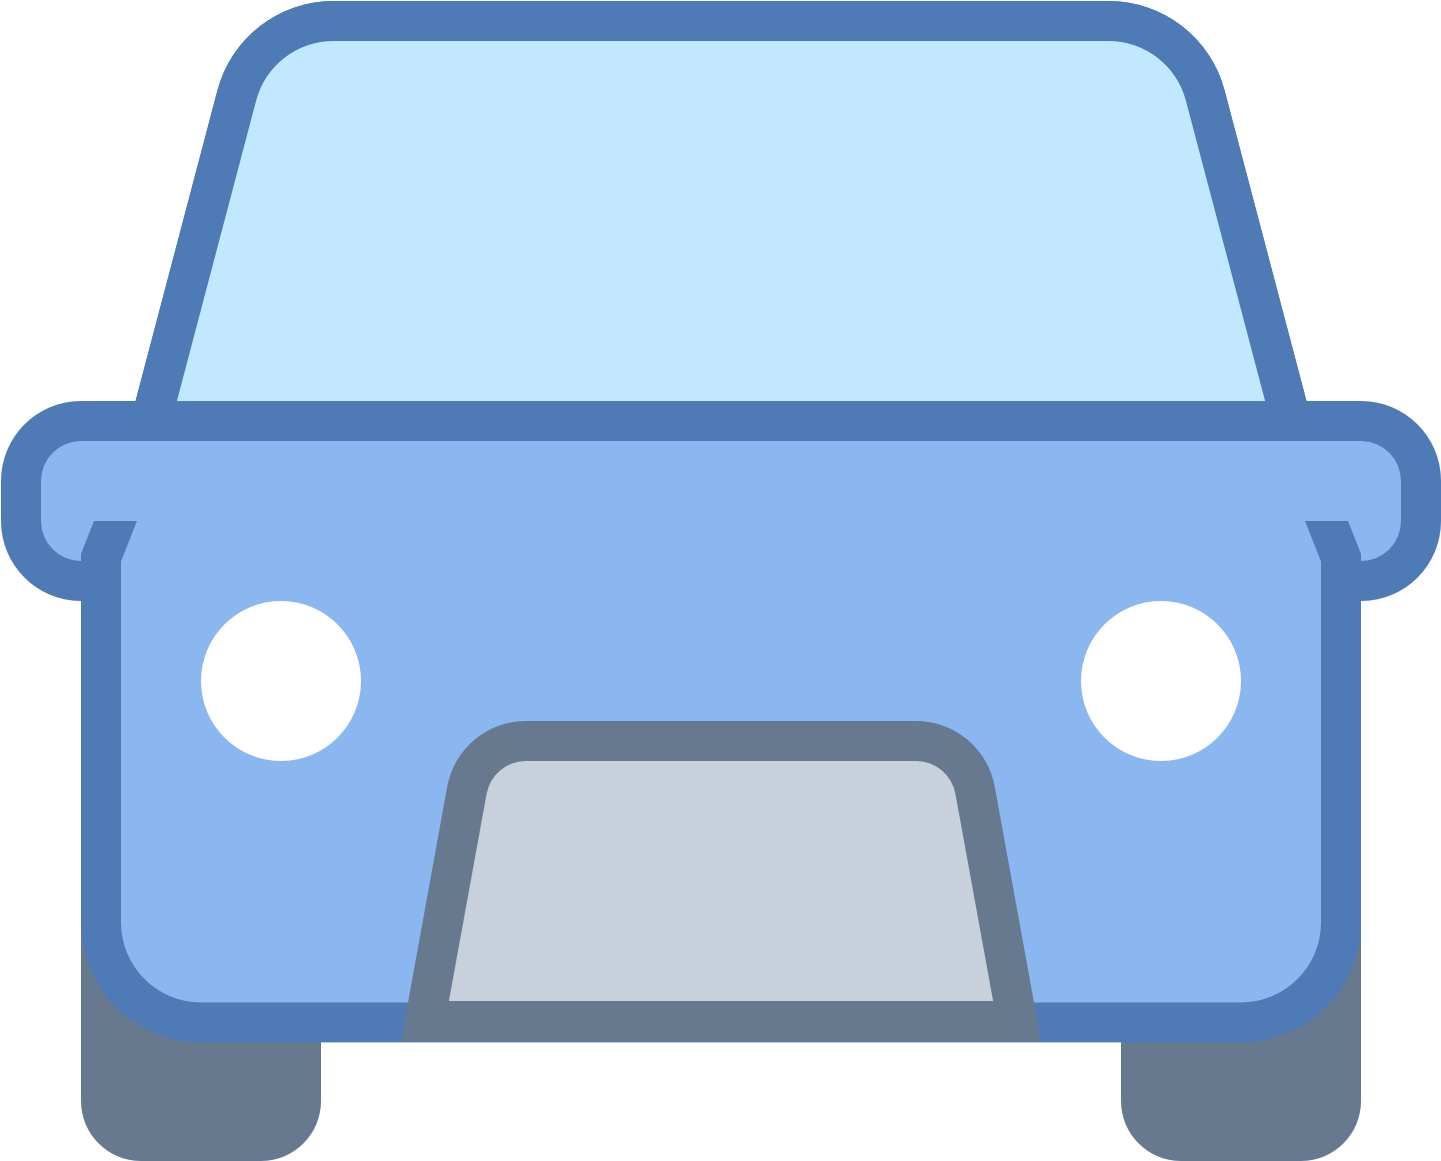 The Icon Shows A Sedan Type Passenger Car That Is Seen - Car (1600x1600)